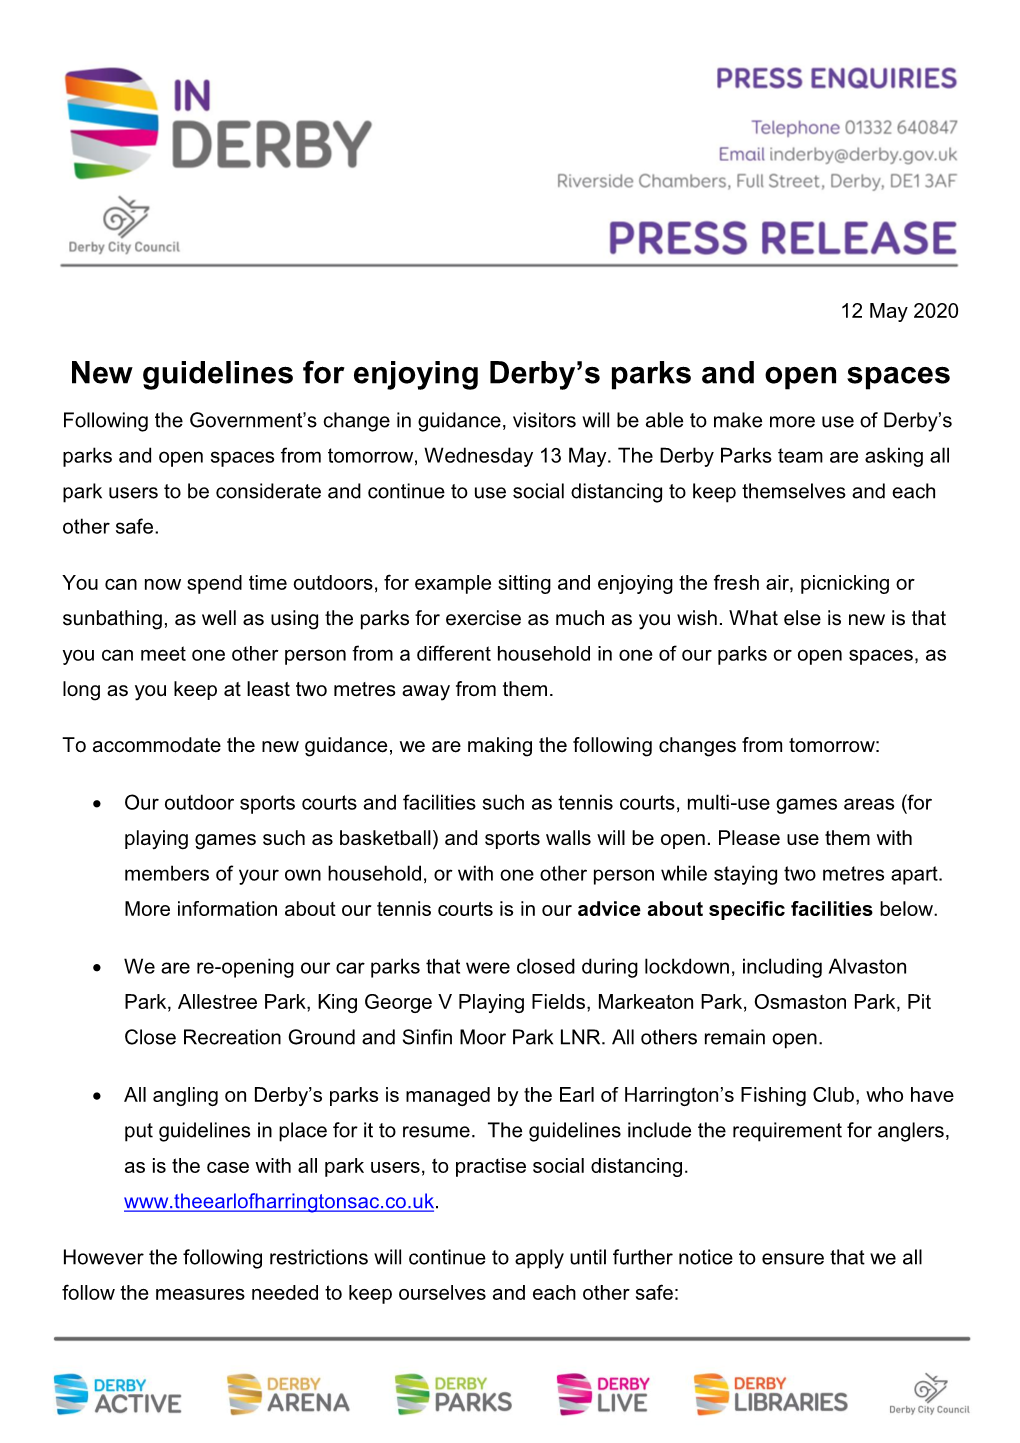 New Guidelines for Enjoying Derby's Parks and Open Spaces